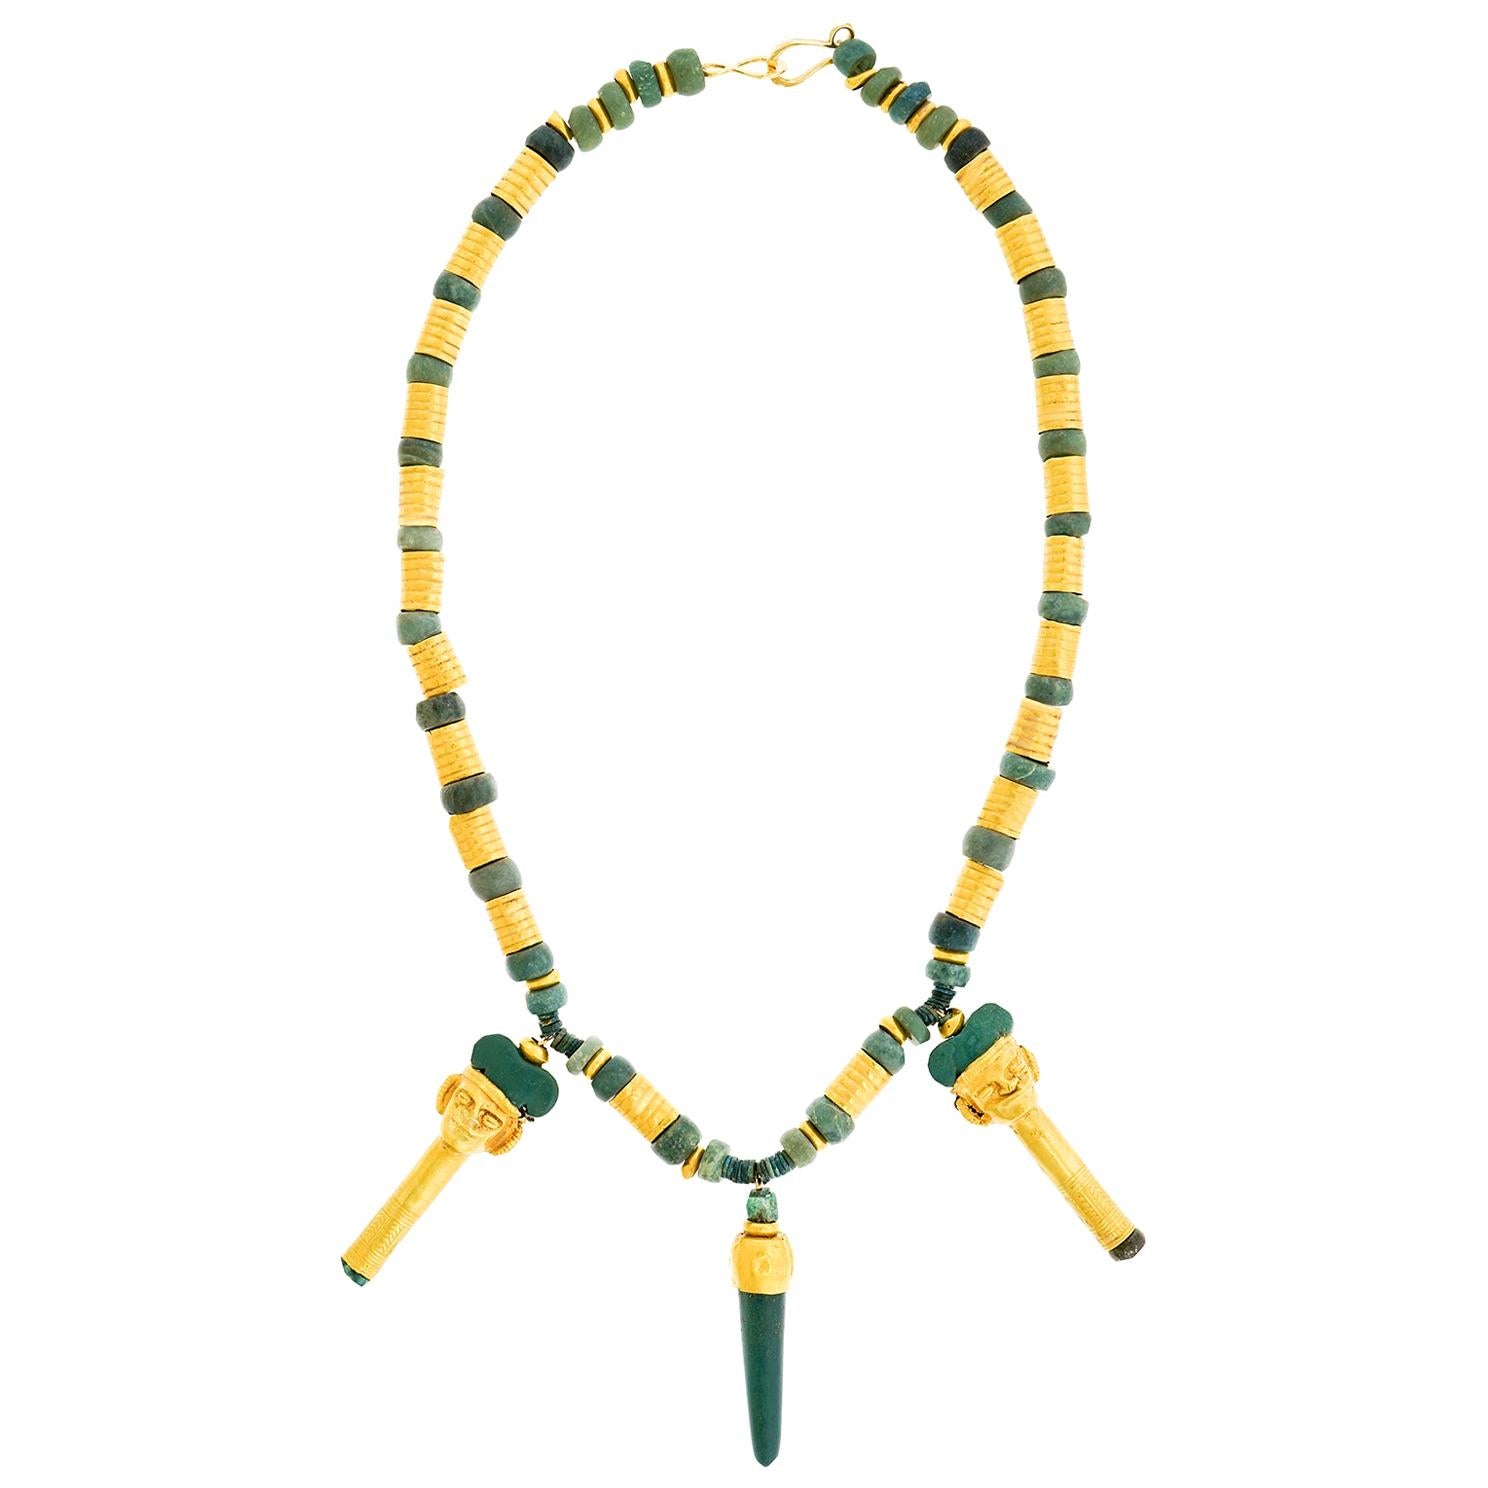 Spectacular Mesoamerican Gold and Jade Necklace